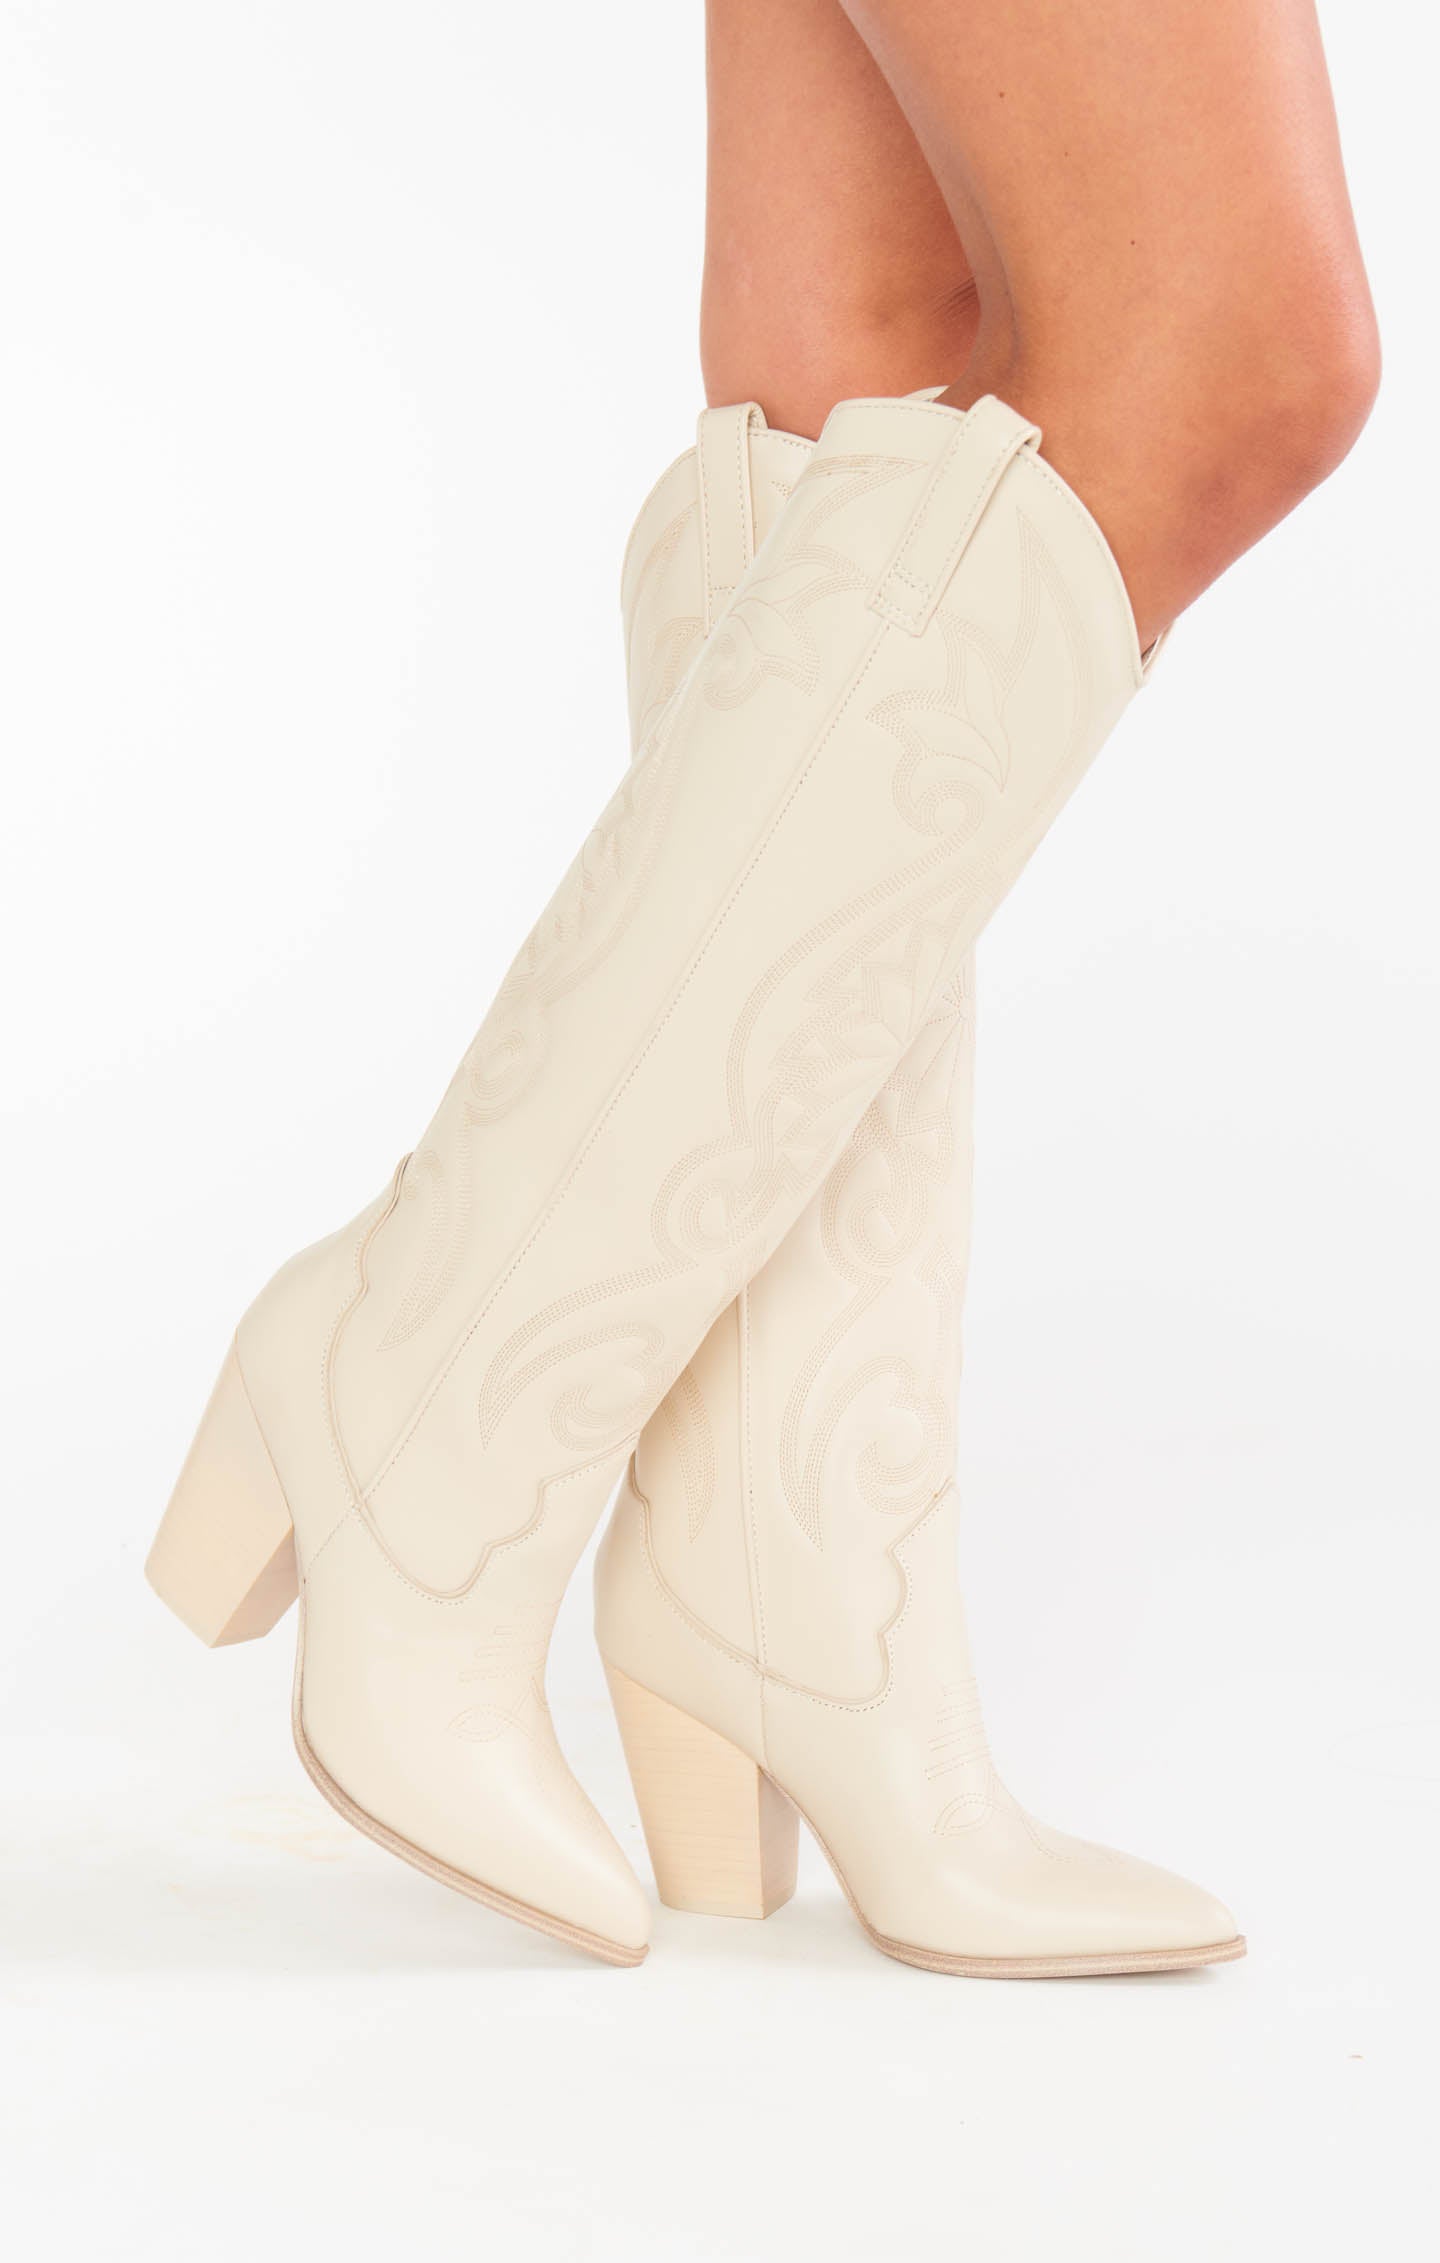 Foot Traffic Floral Lace Knee High Trouser Sock – Socks by My Foot